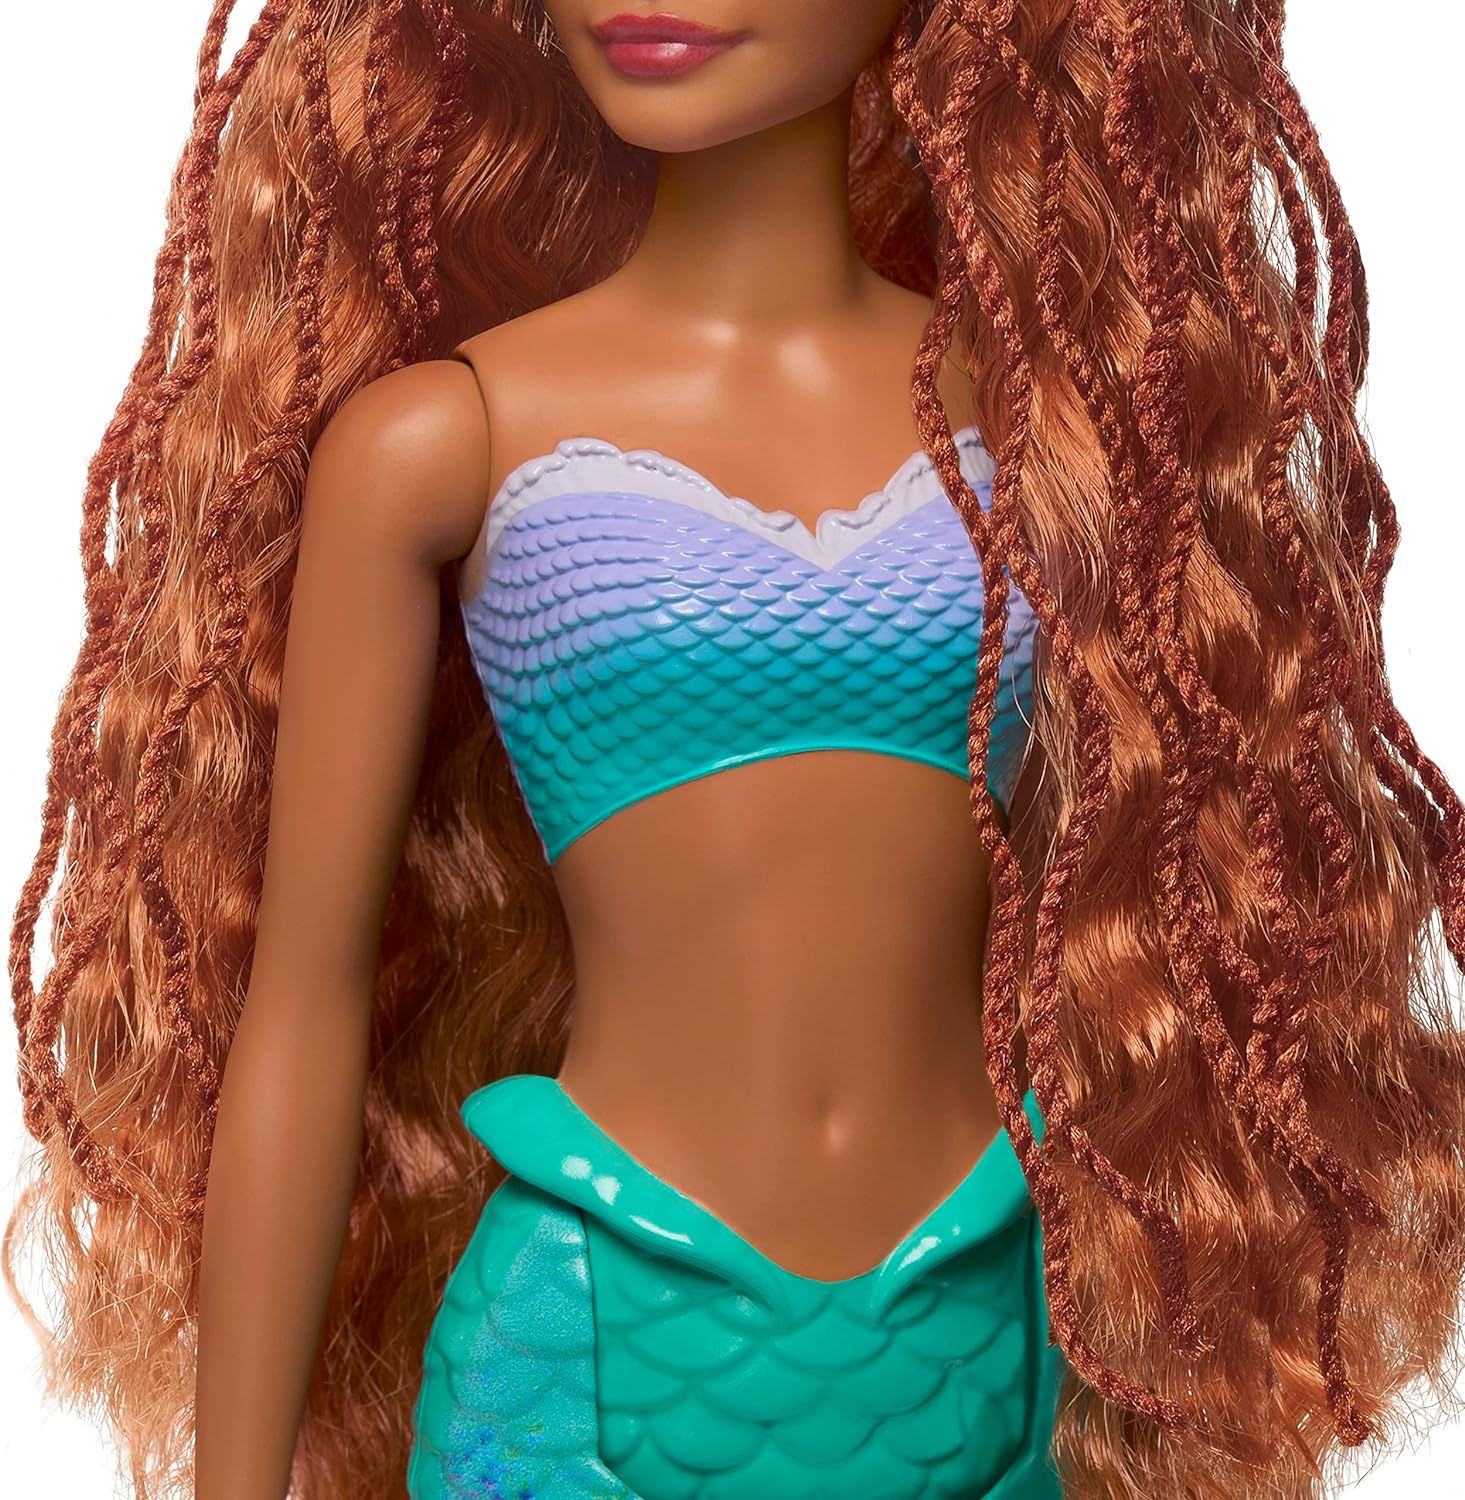 Mattel Disney the Little Mermaid Ariel Doll, Mermaid Fashion Doll with Signature Outfit, Toys Inspired by Disney's the Little Mermaid